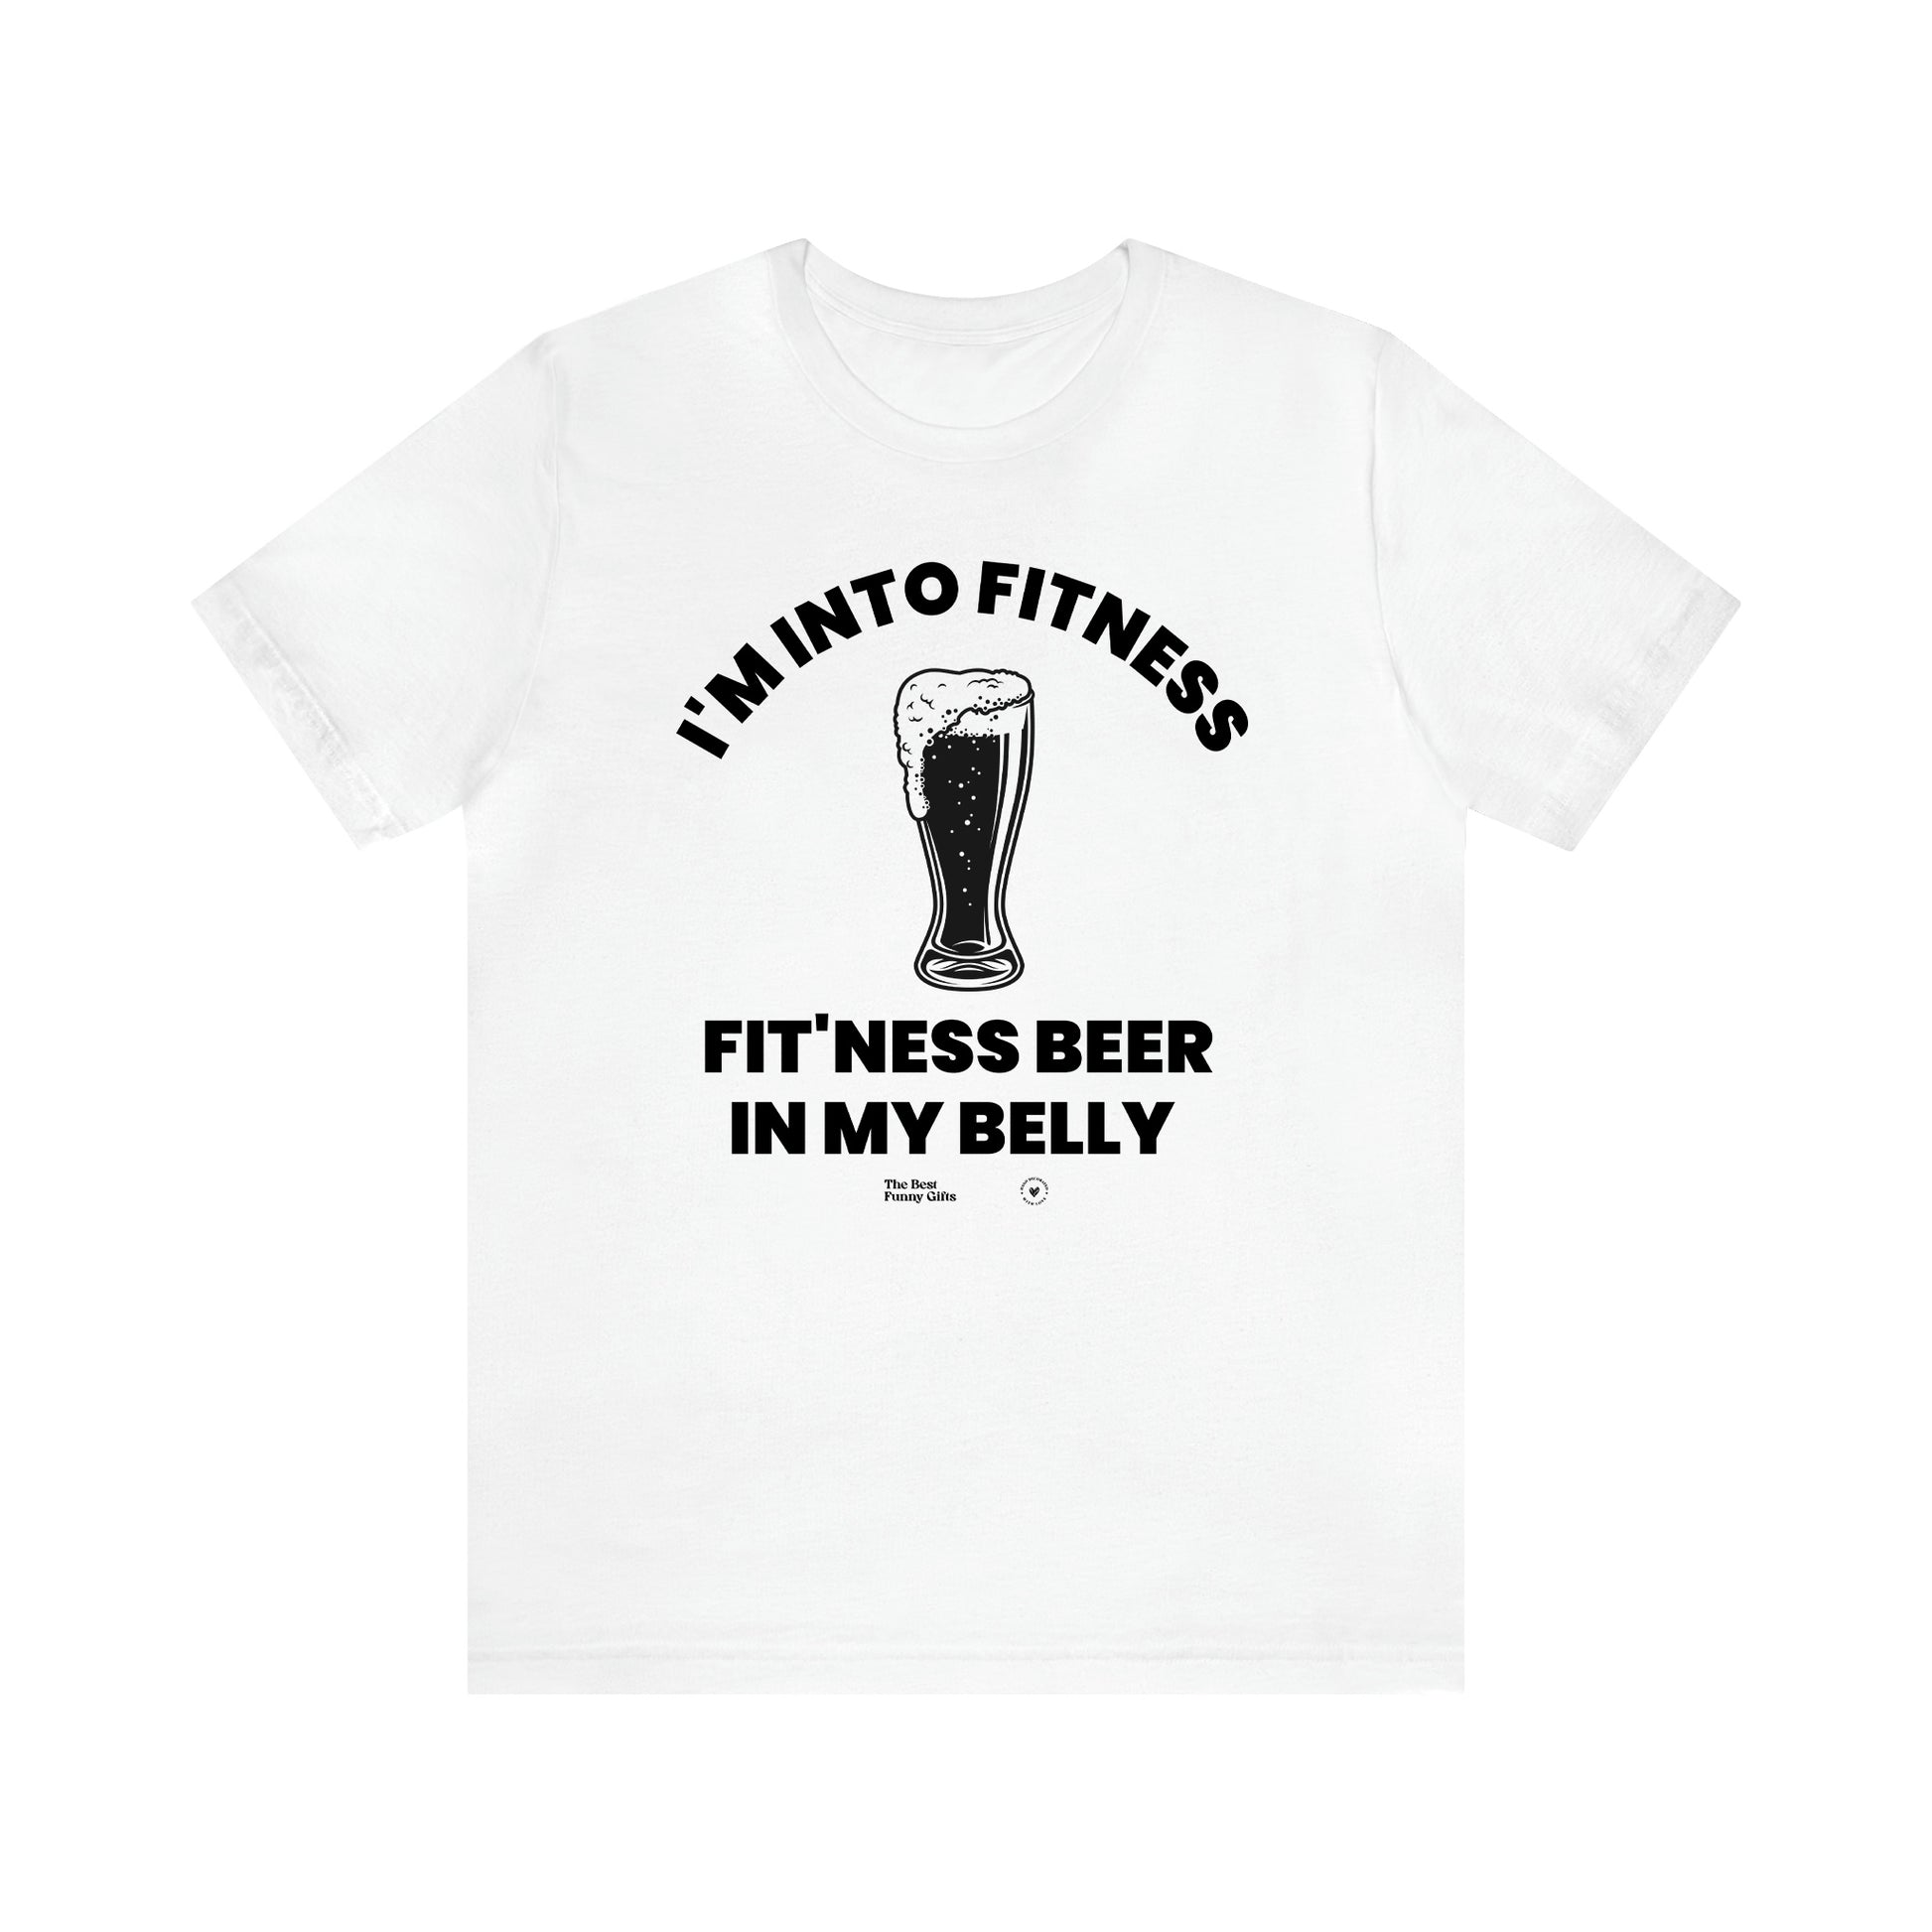 Men's T Shirts I'm Into Fitness Fit'ness Beer in My Belly - The Best Funny Gifts